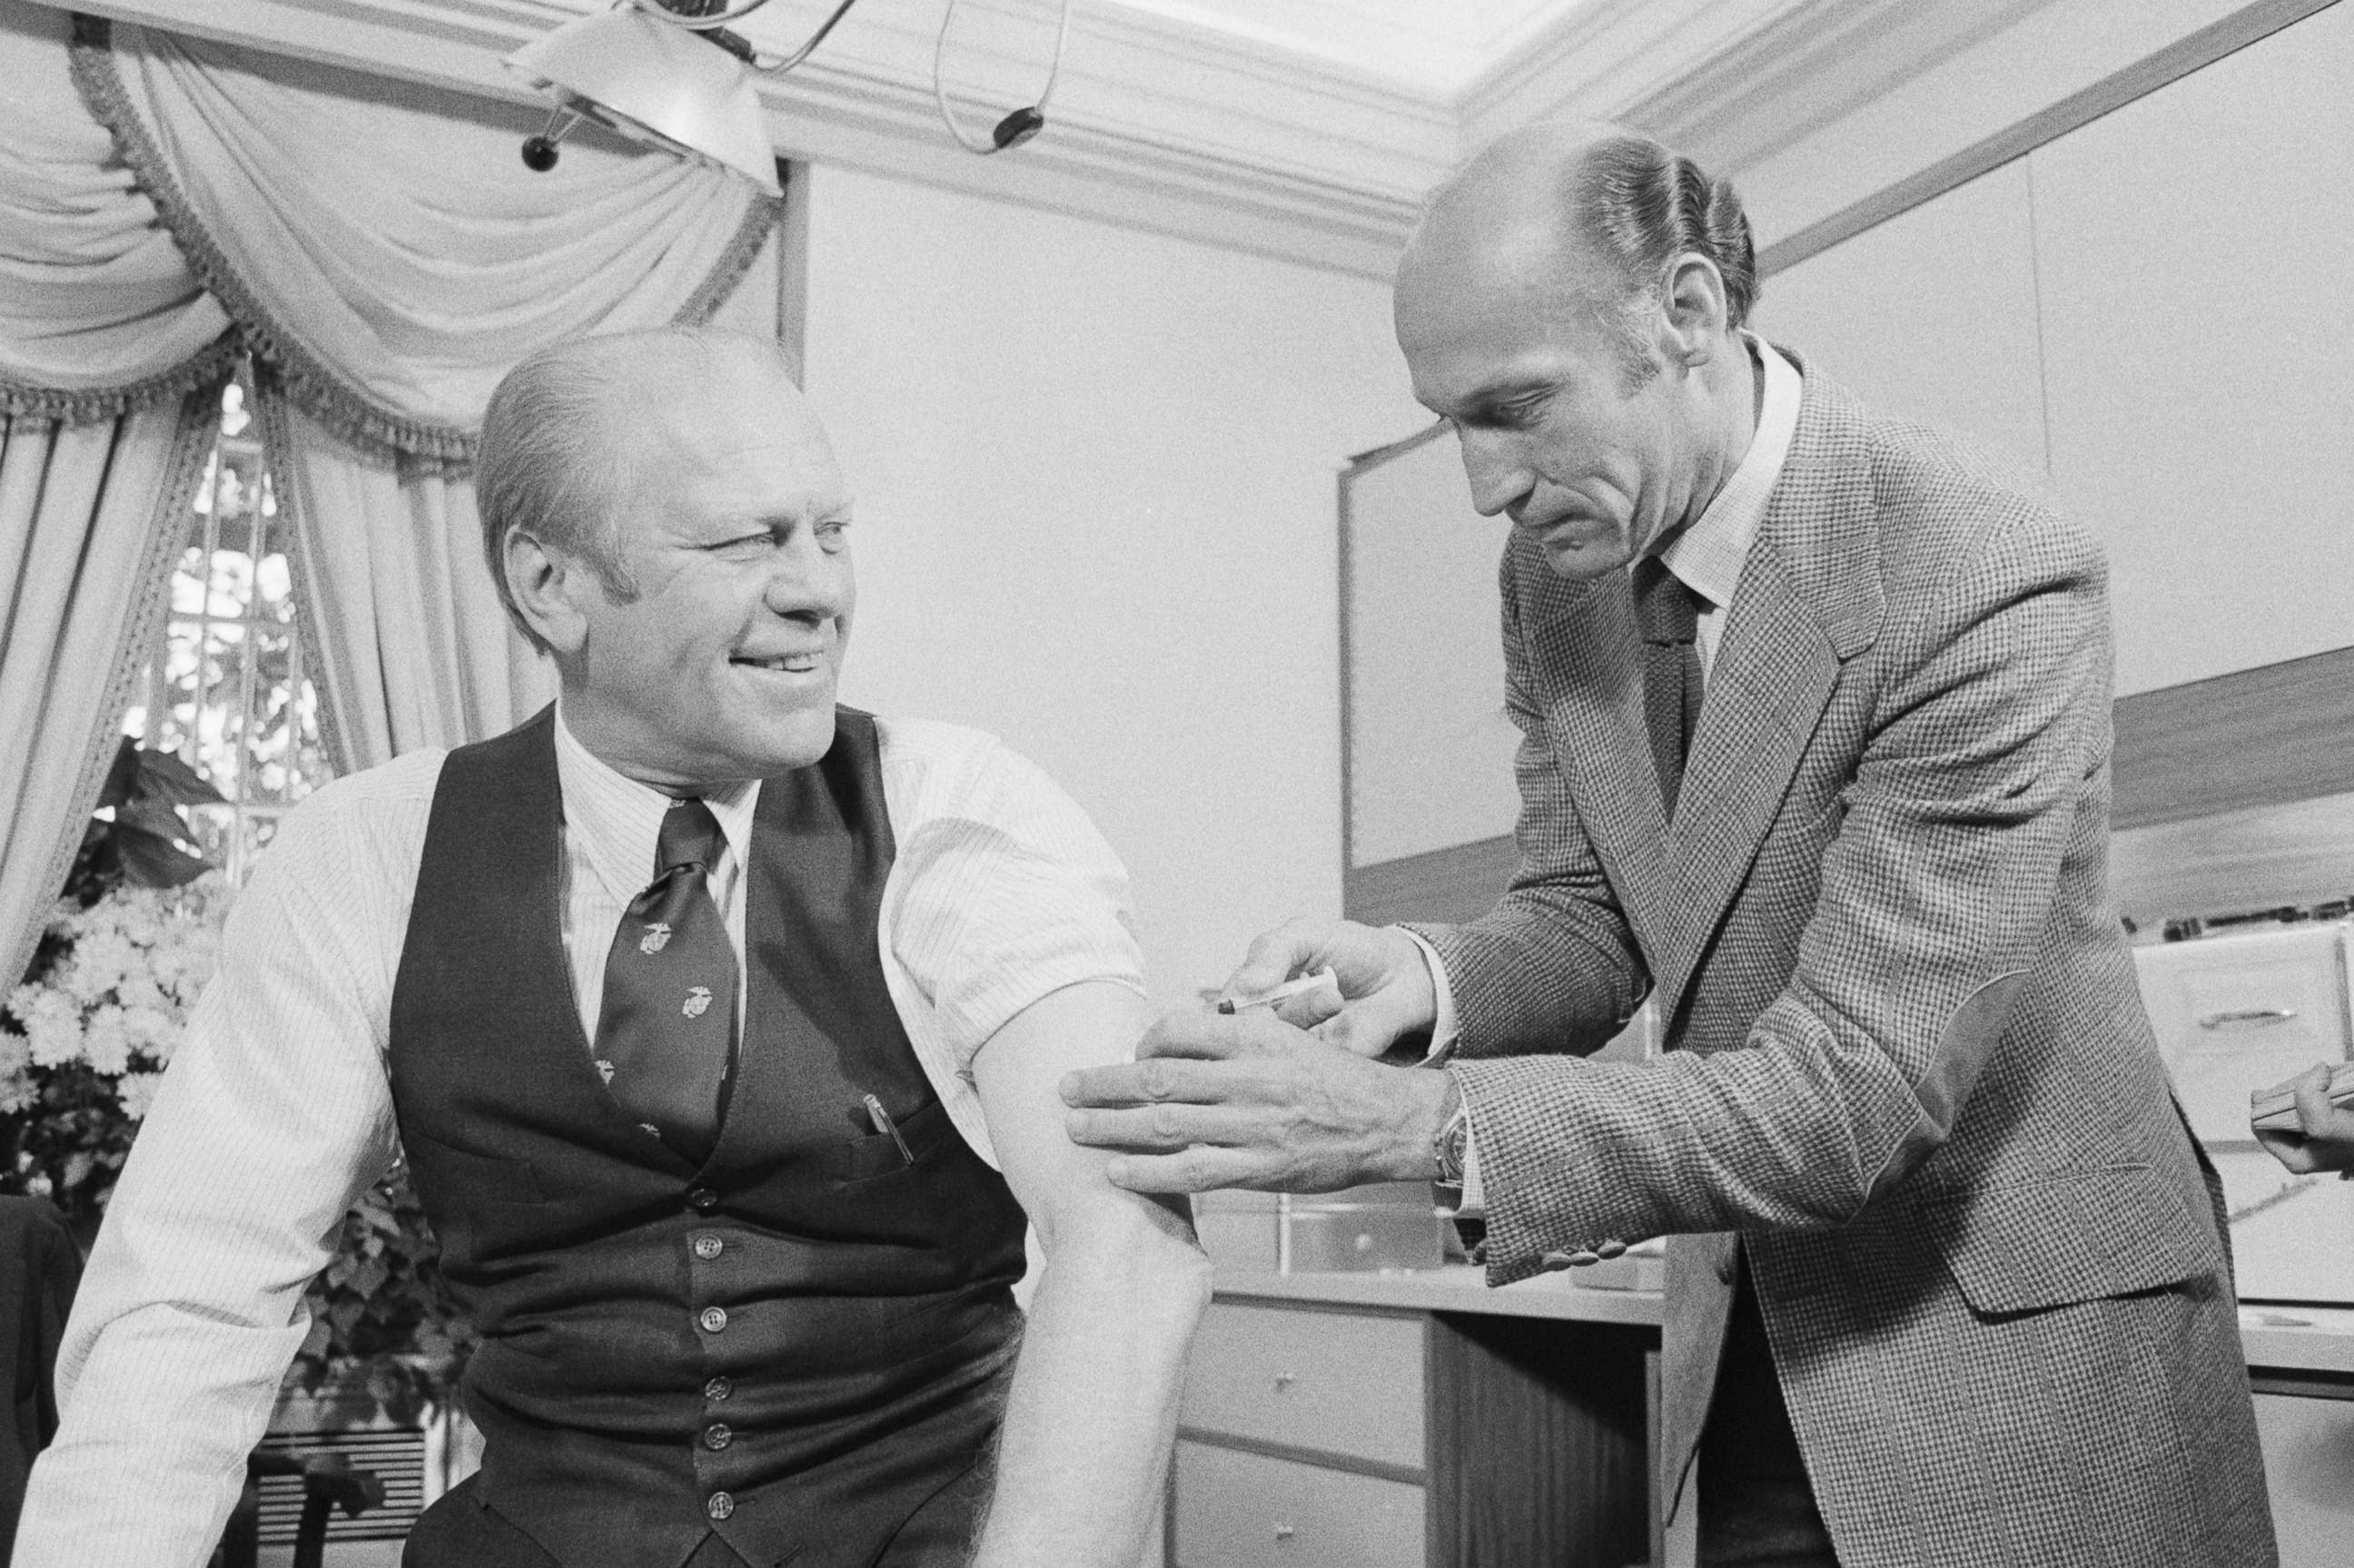 PHOTO: In this Oct. 14, 1976, file photo, President Ford gets a swine flu shot.